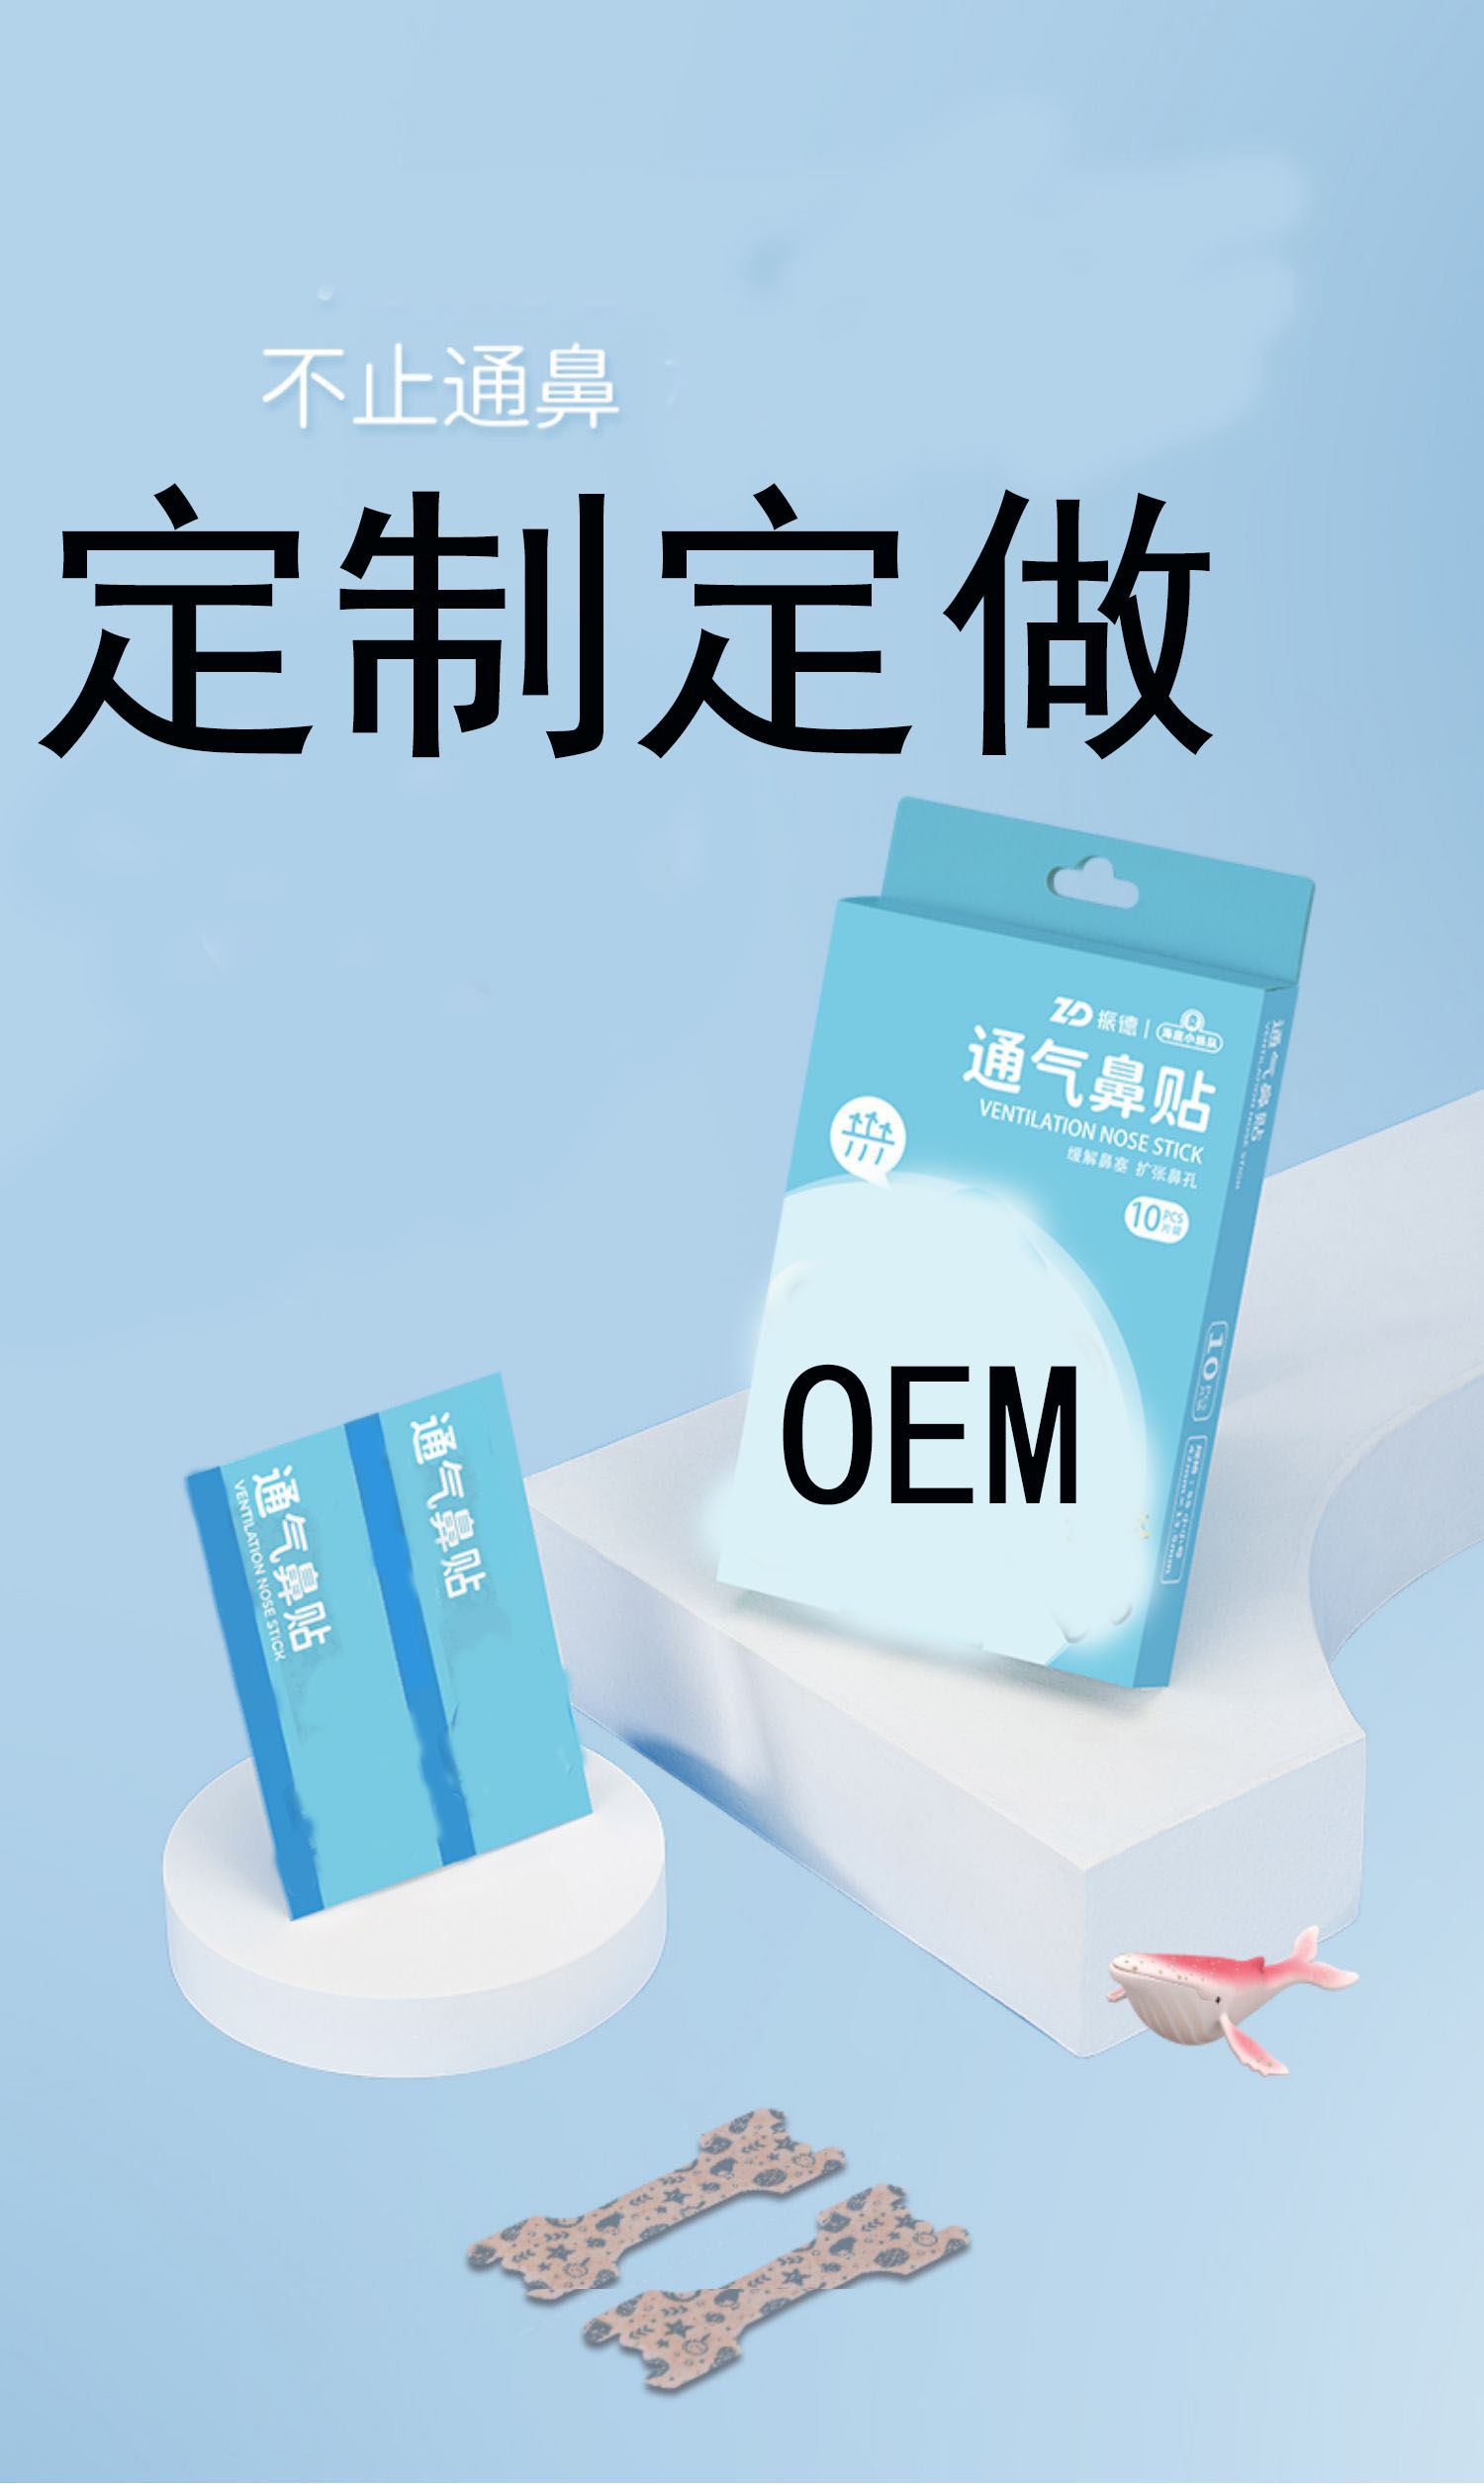 Qinlu acupoint sticking rhinitis sticking label brand customization, private customization, complete specifications, direct supply